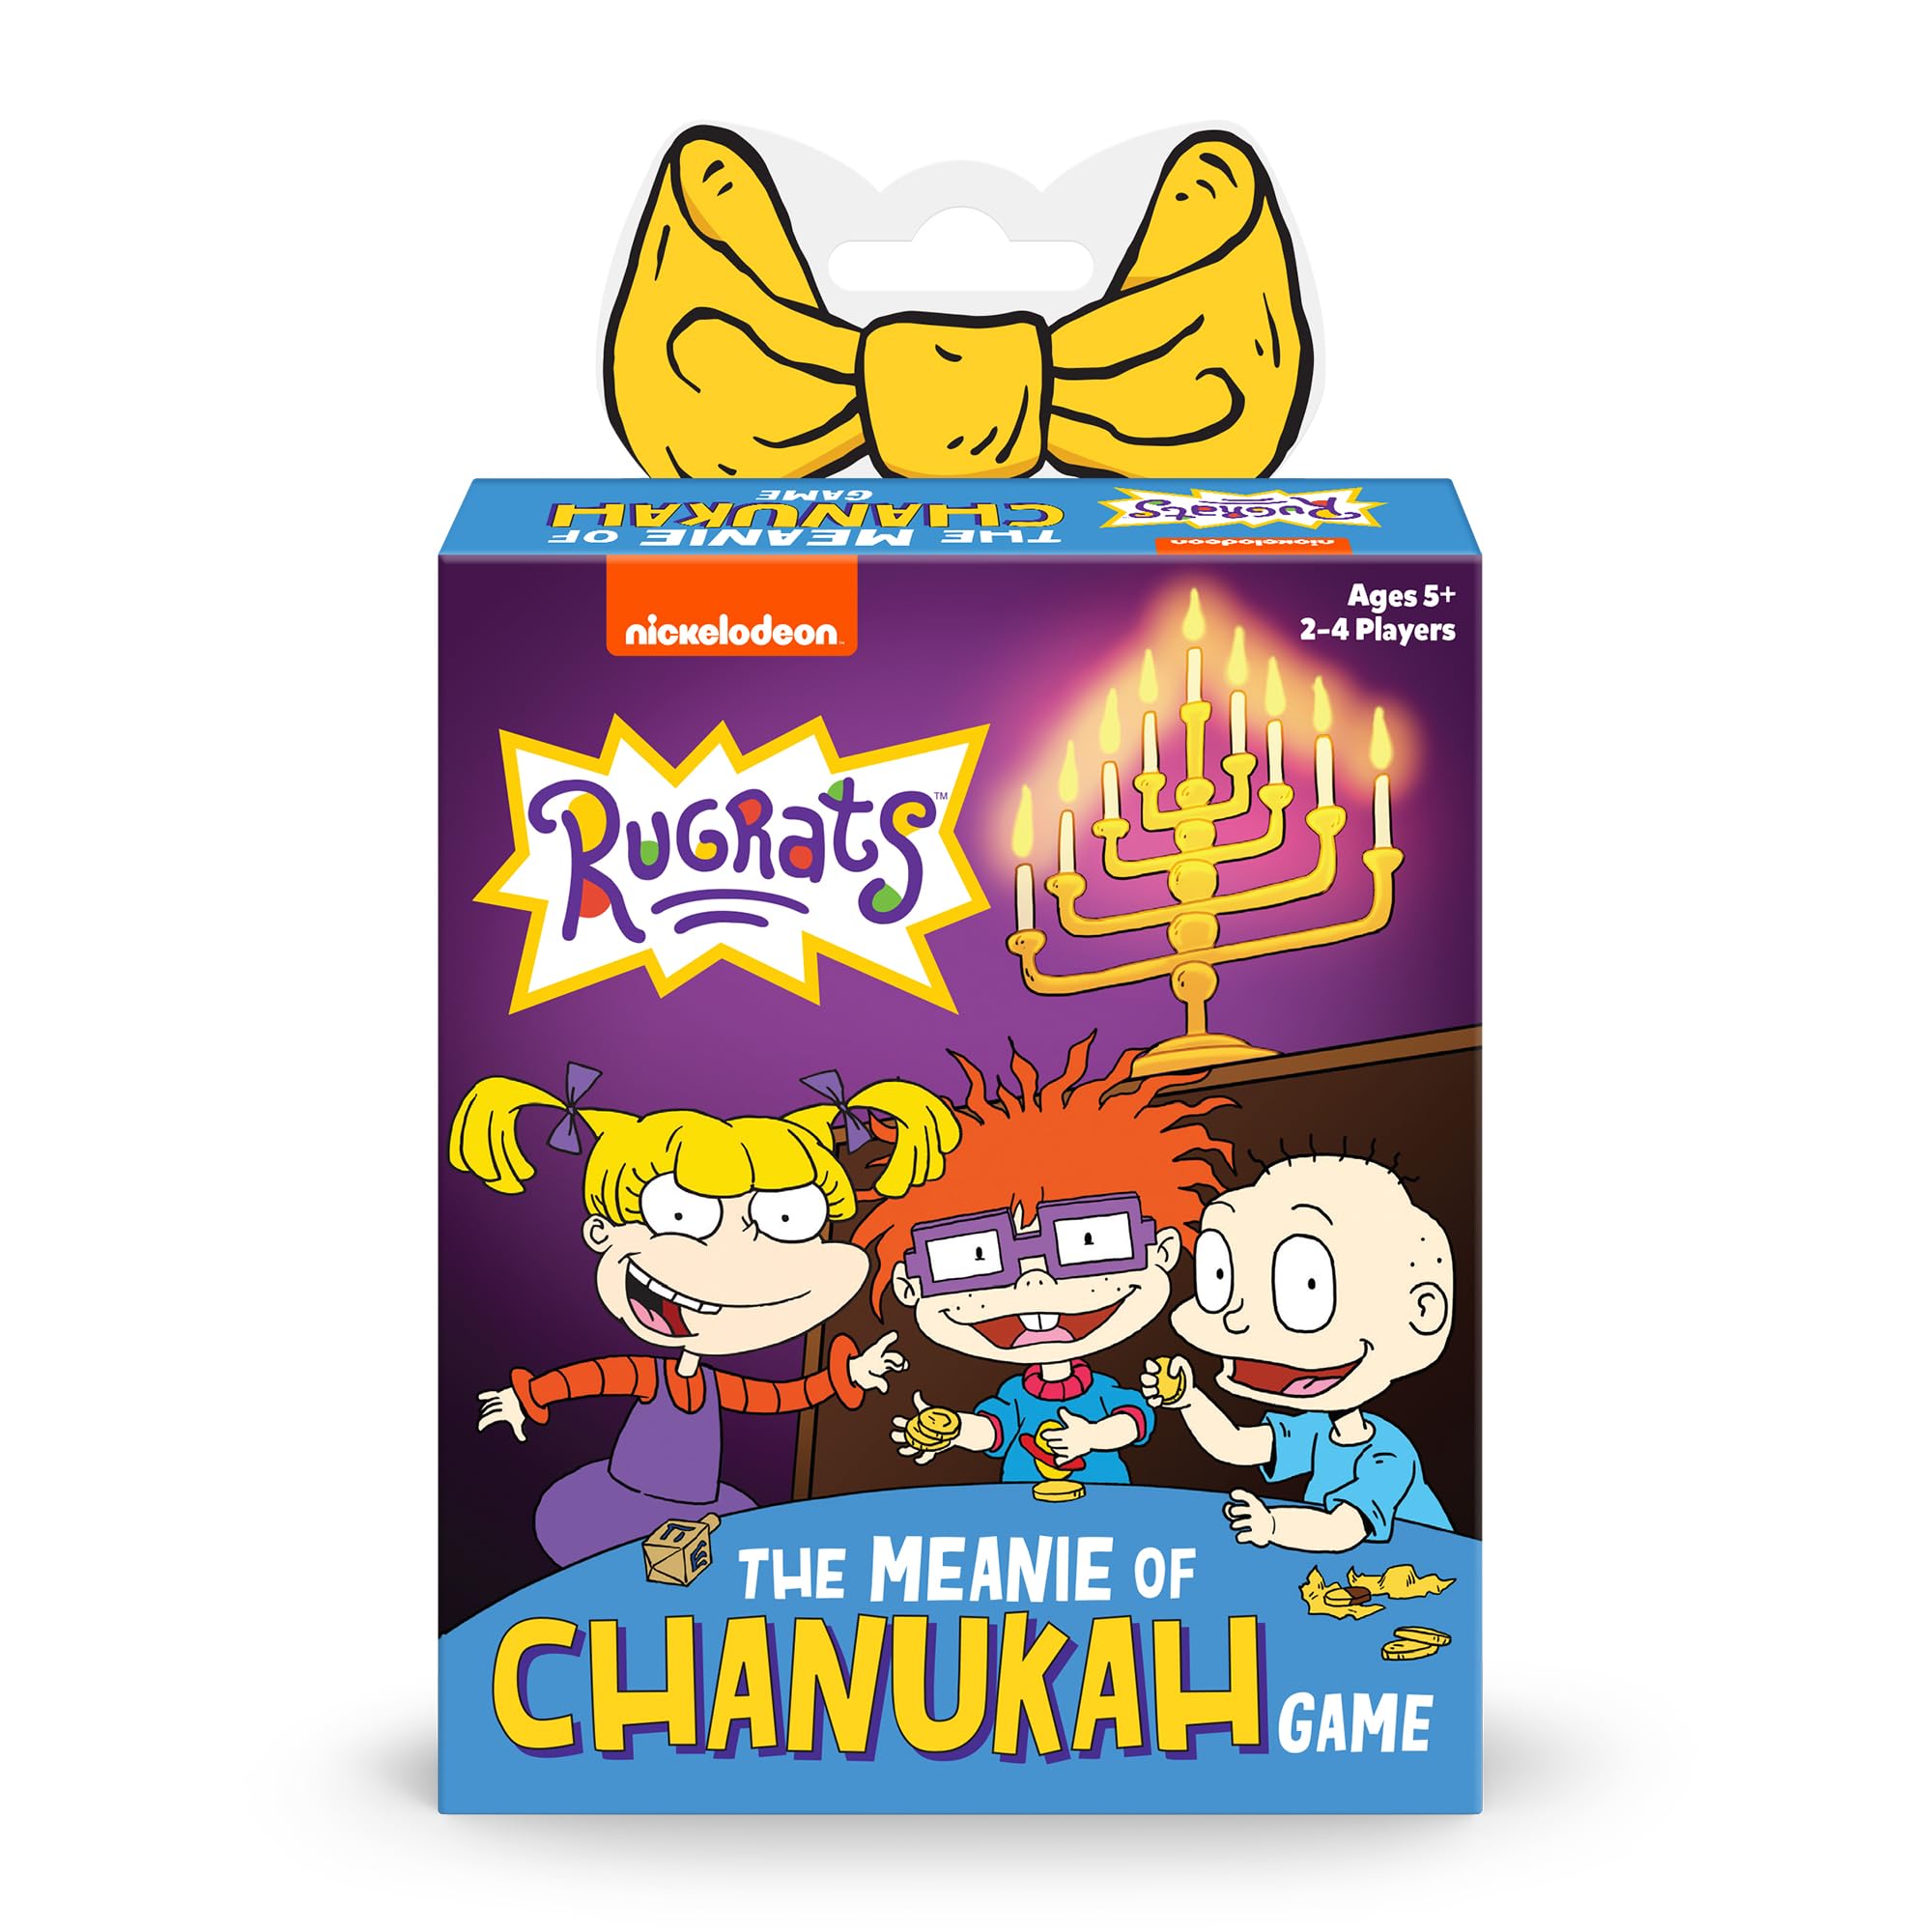 Funko Games: Rugrats The Meanie of Chanukah Game $3.50, Rudolph The Red-Nosed Reindeer Snowstorm Scramble Game $4 + Free Shipping w/ Prime or on $35+